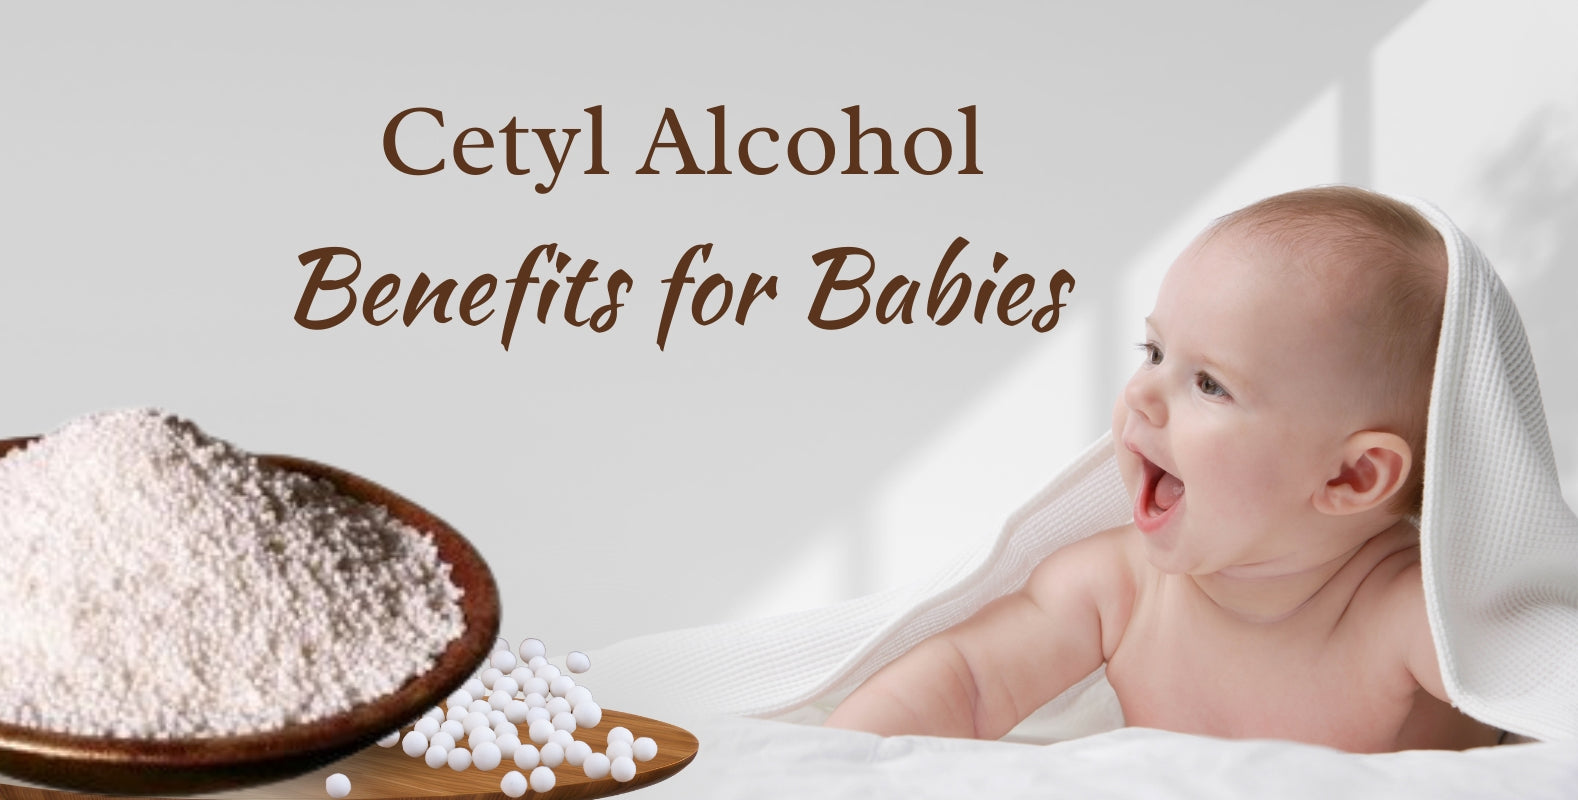 Cetyl Alcohol: Uses, Benefits & Side Effects - The Unbottle Co